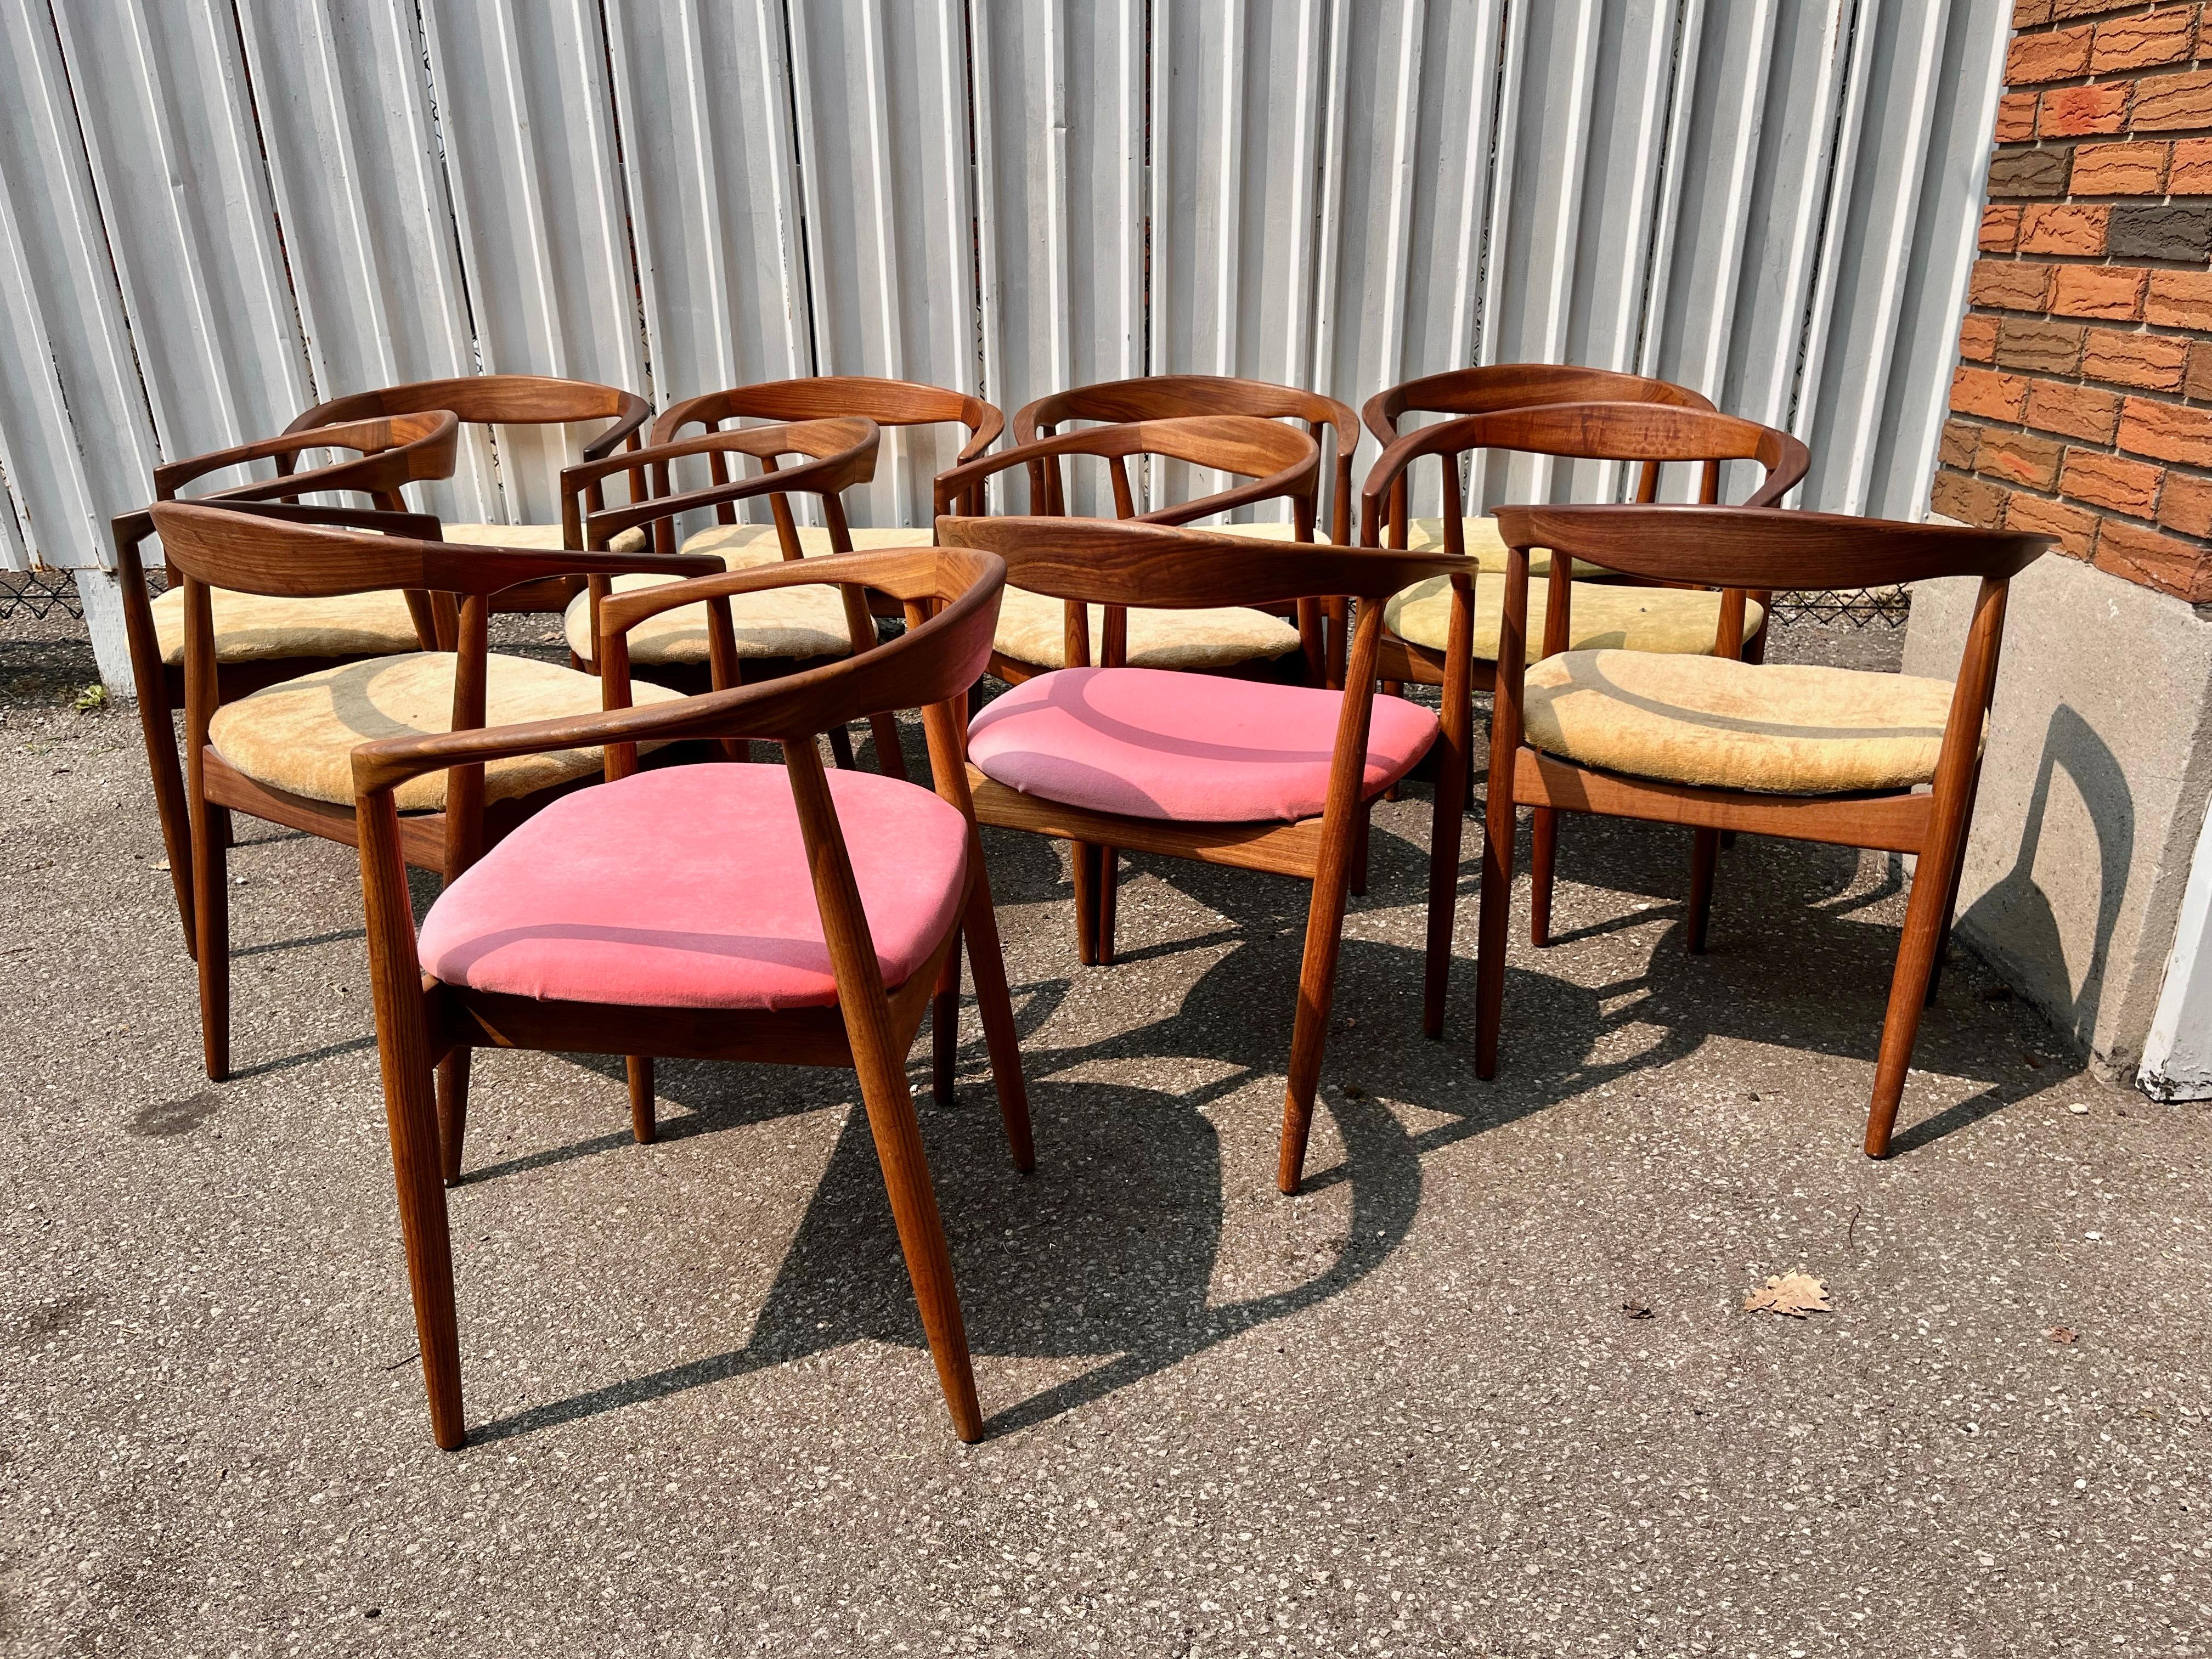 Stunning set of 12 Kai Kristiansen 'Troja' round chair from circa 1955... designed in the style of famed Hans Wegner Chair,. The frame is made from Afromosia Teak wood which retains its original finish and patina. Superior quality and construction,,